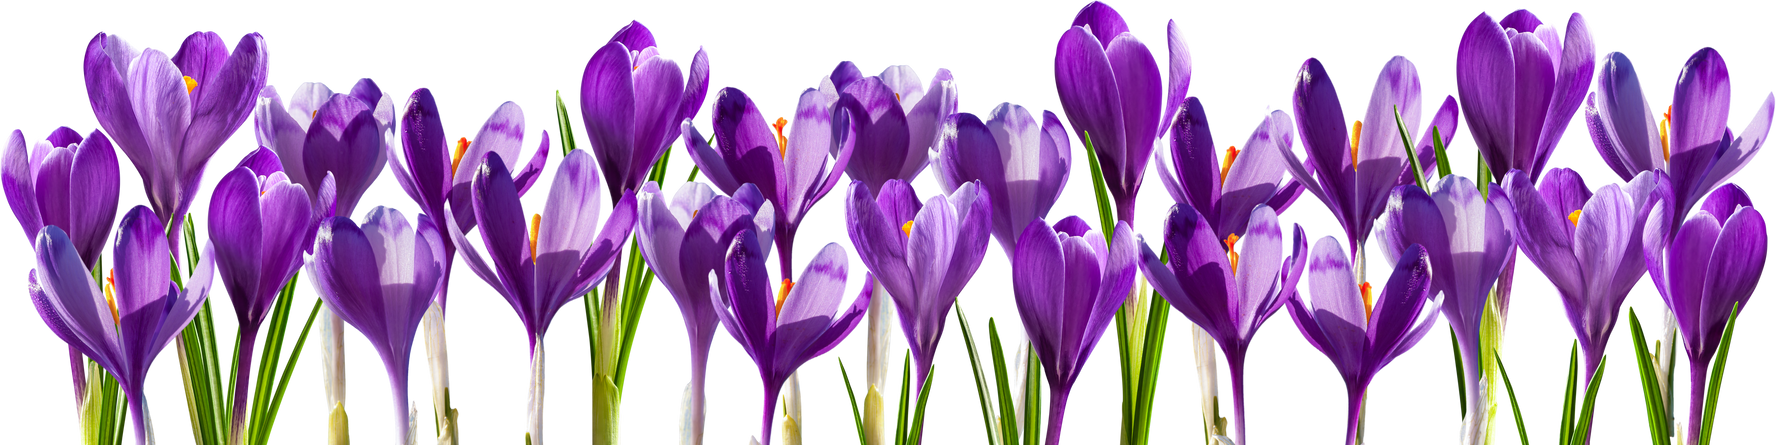 Crocus Purple Flowers Isolated Png